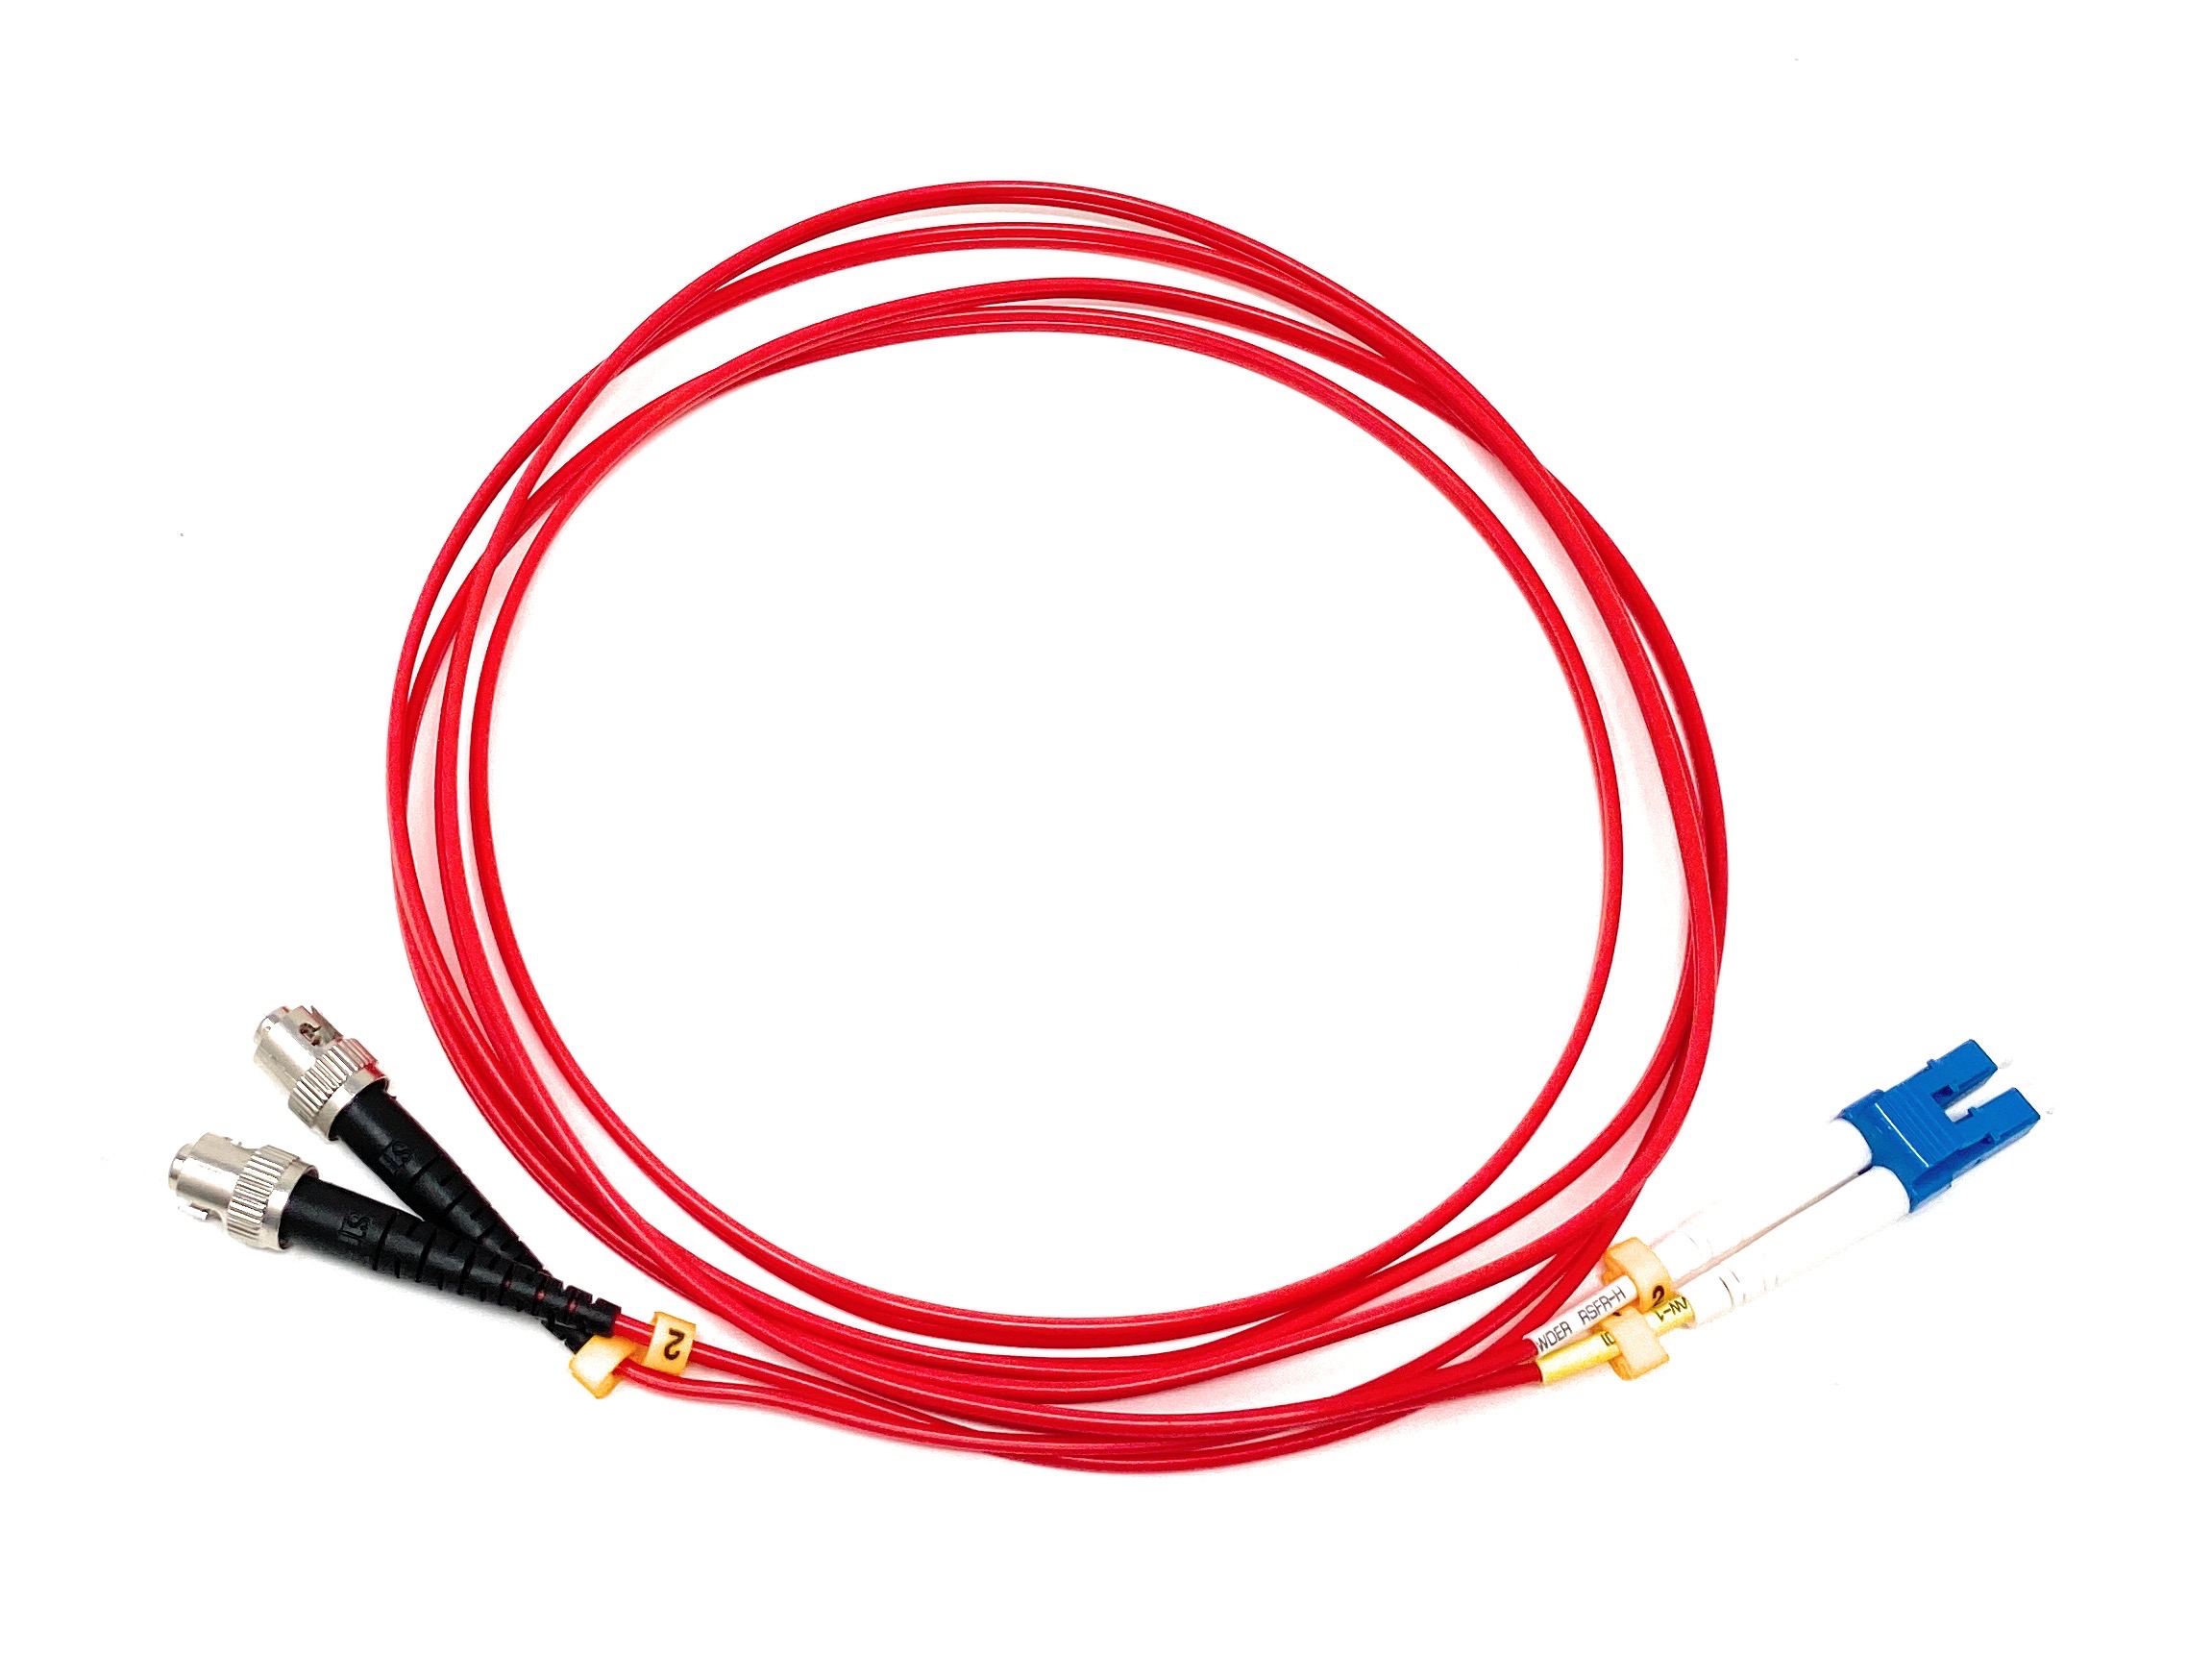 LC TO ST 9/125 Duplex Singlemode Fiber Optic Cable-1 Meter Red Jacket